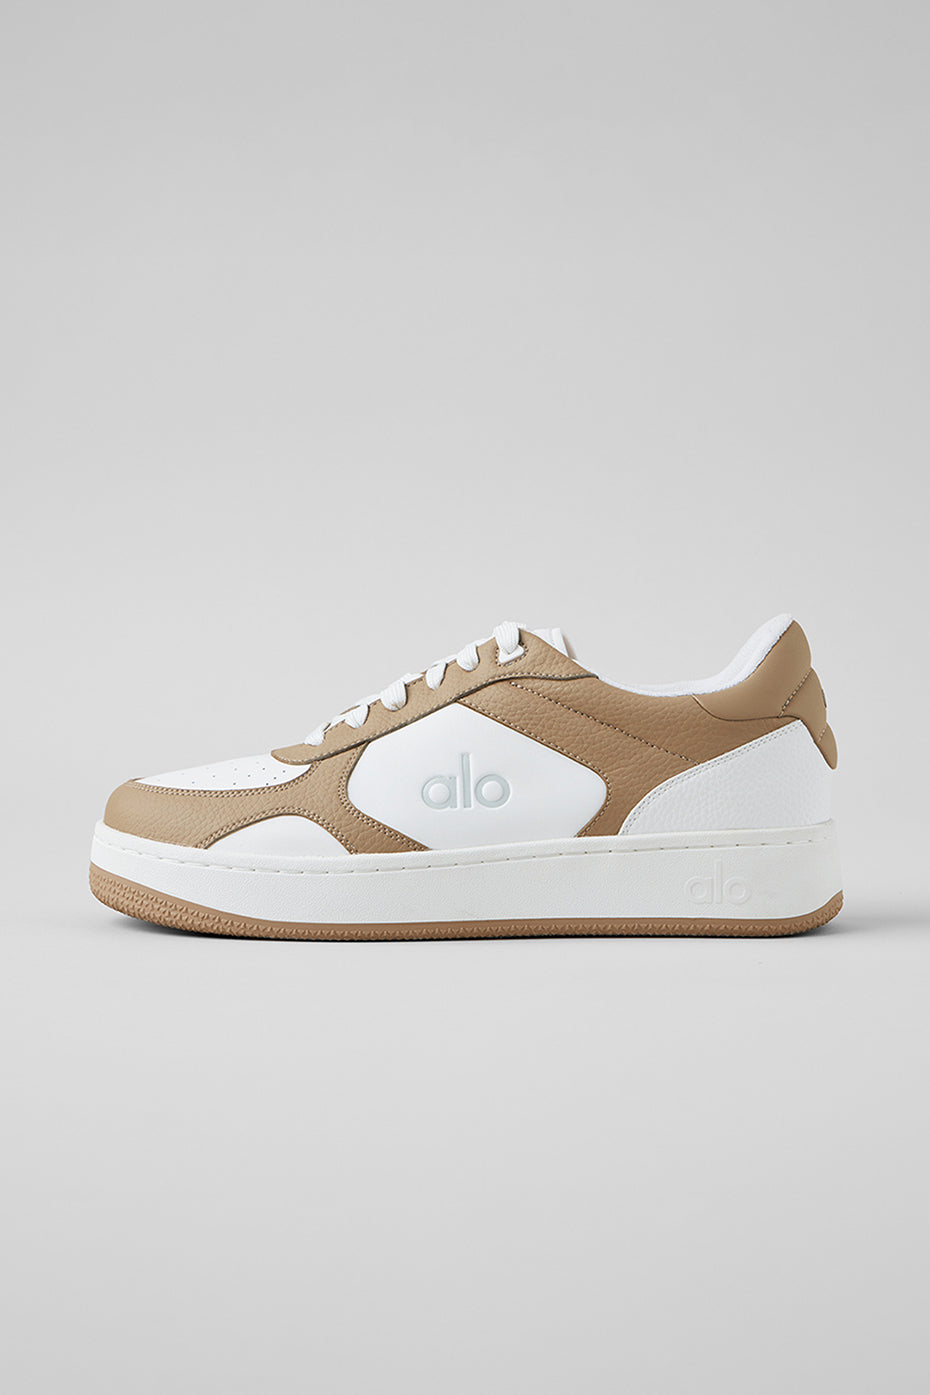 ALO Yoga, Shoes, Alo Sneakers In Size 9